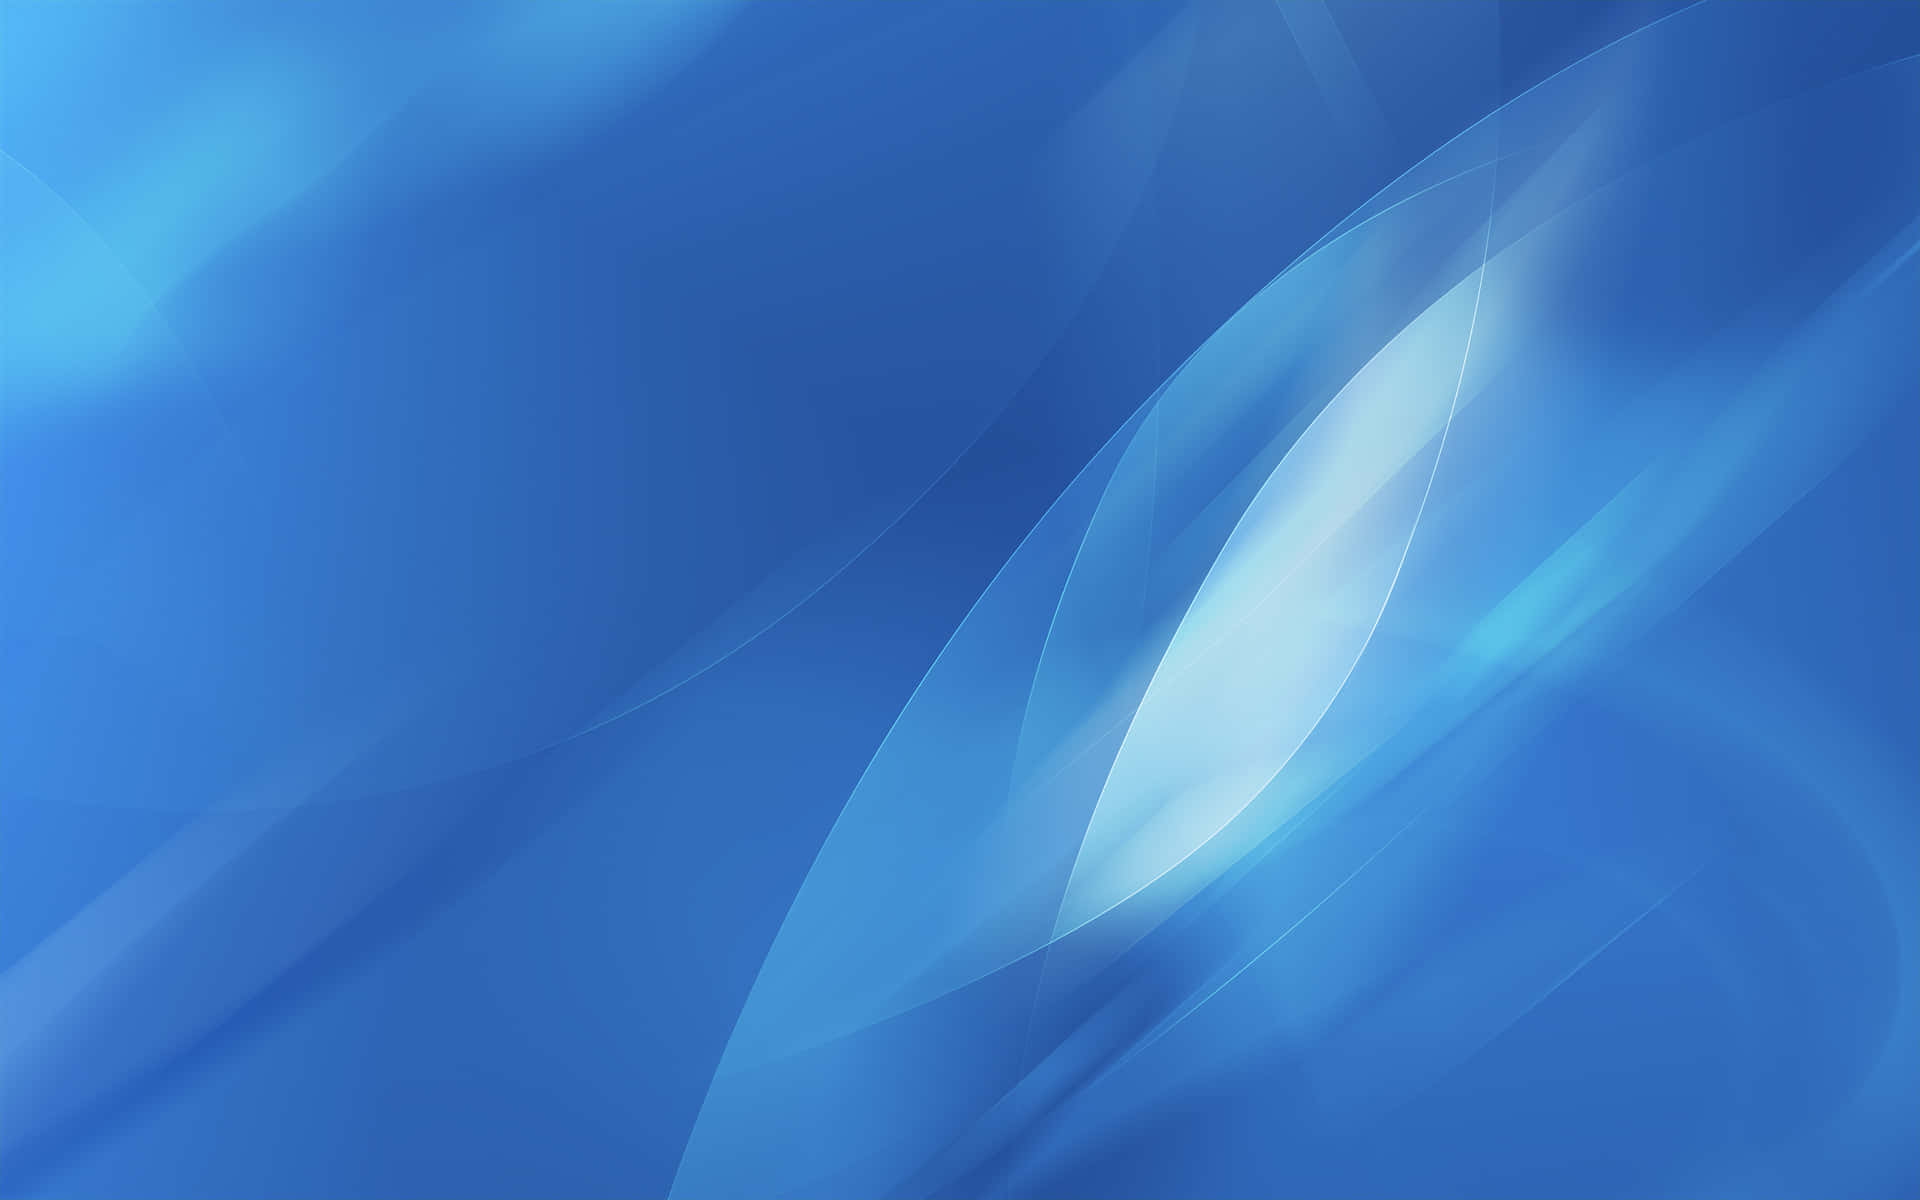 Abstract Blue - A creative, vibrant background for your digital display